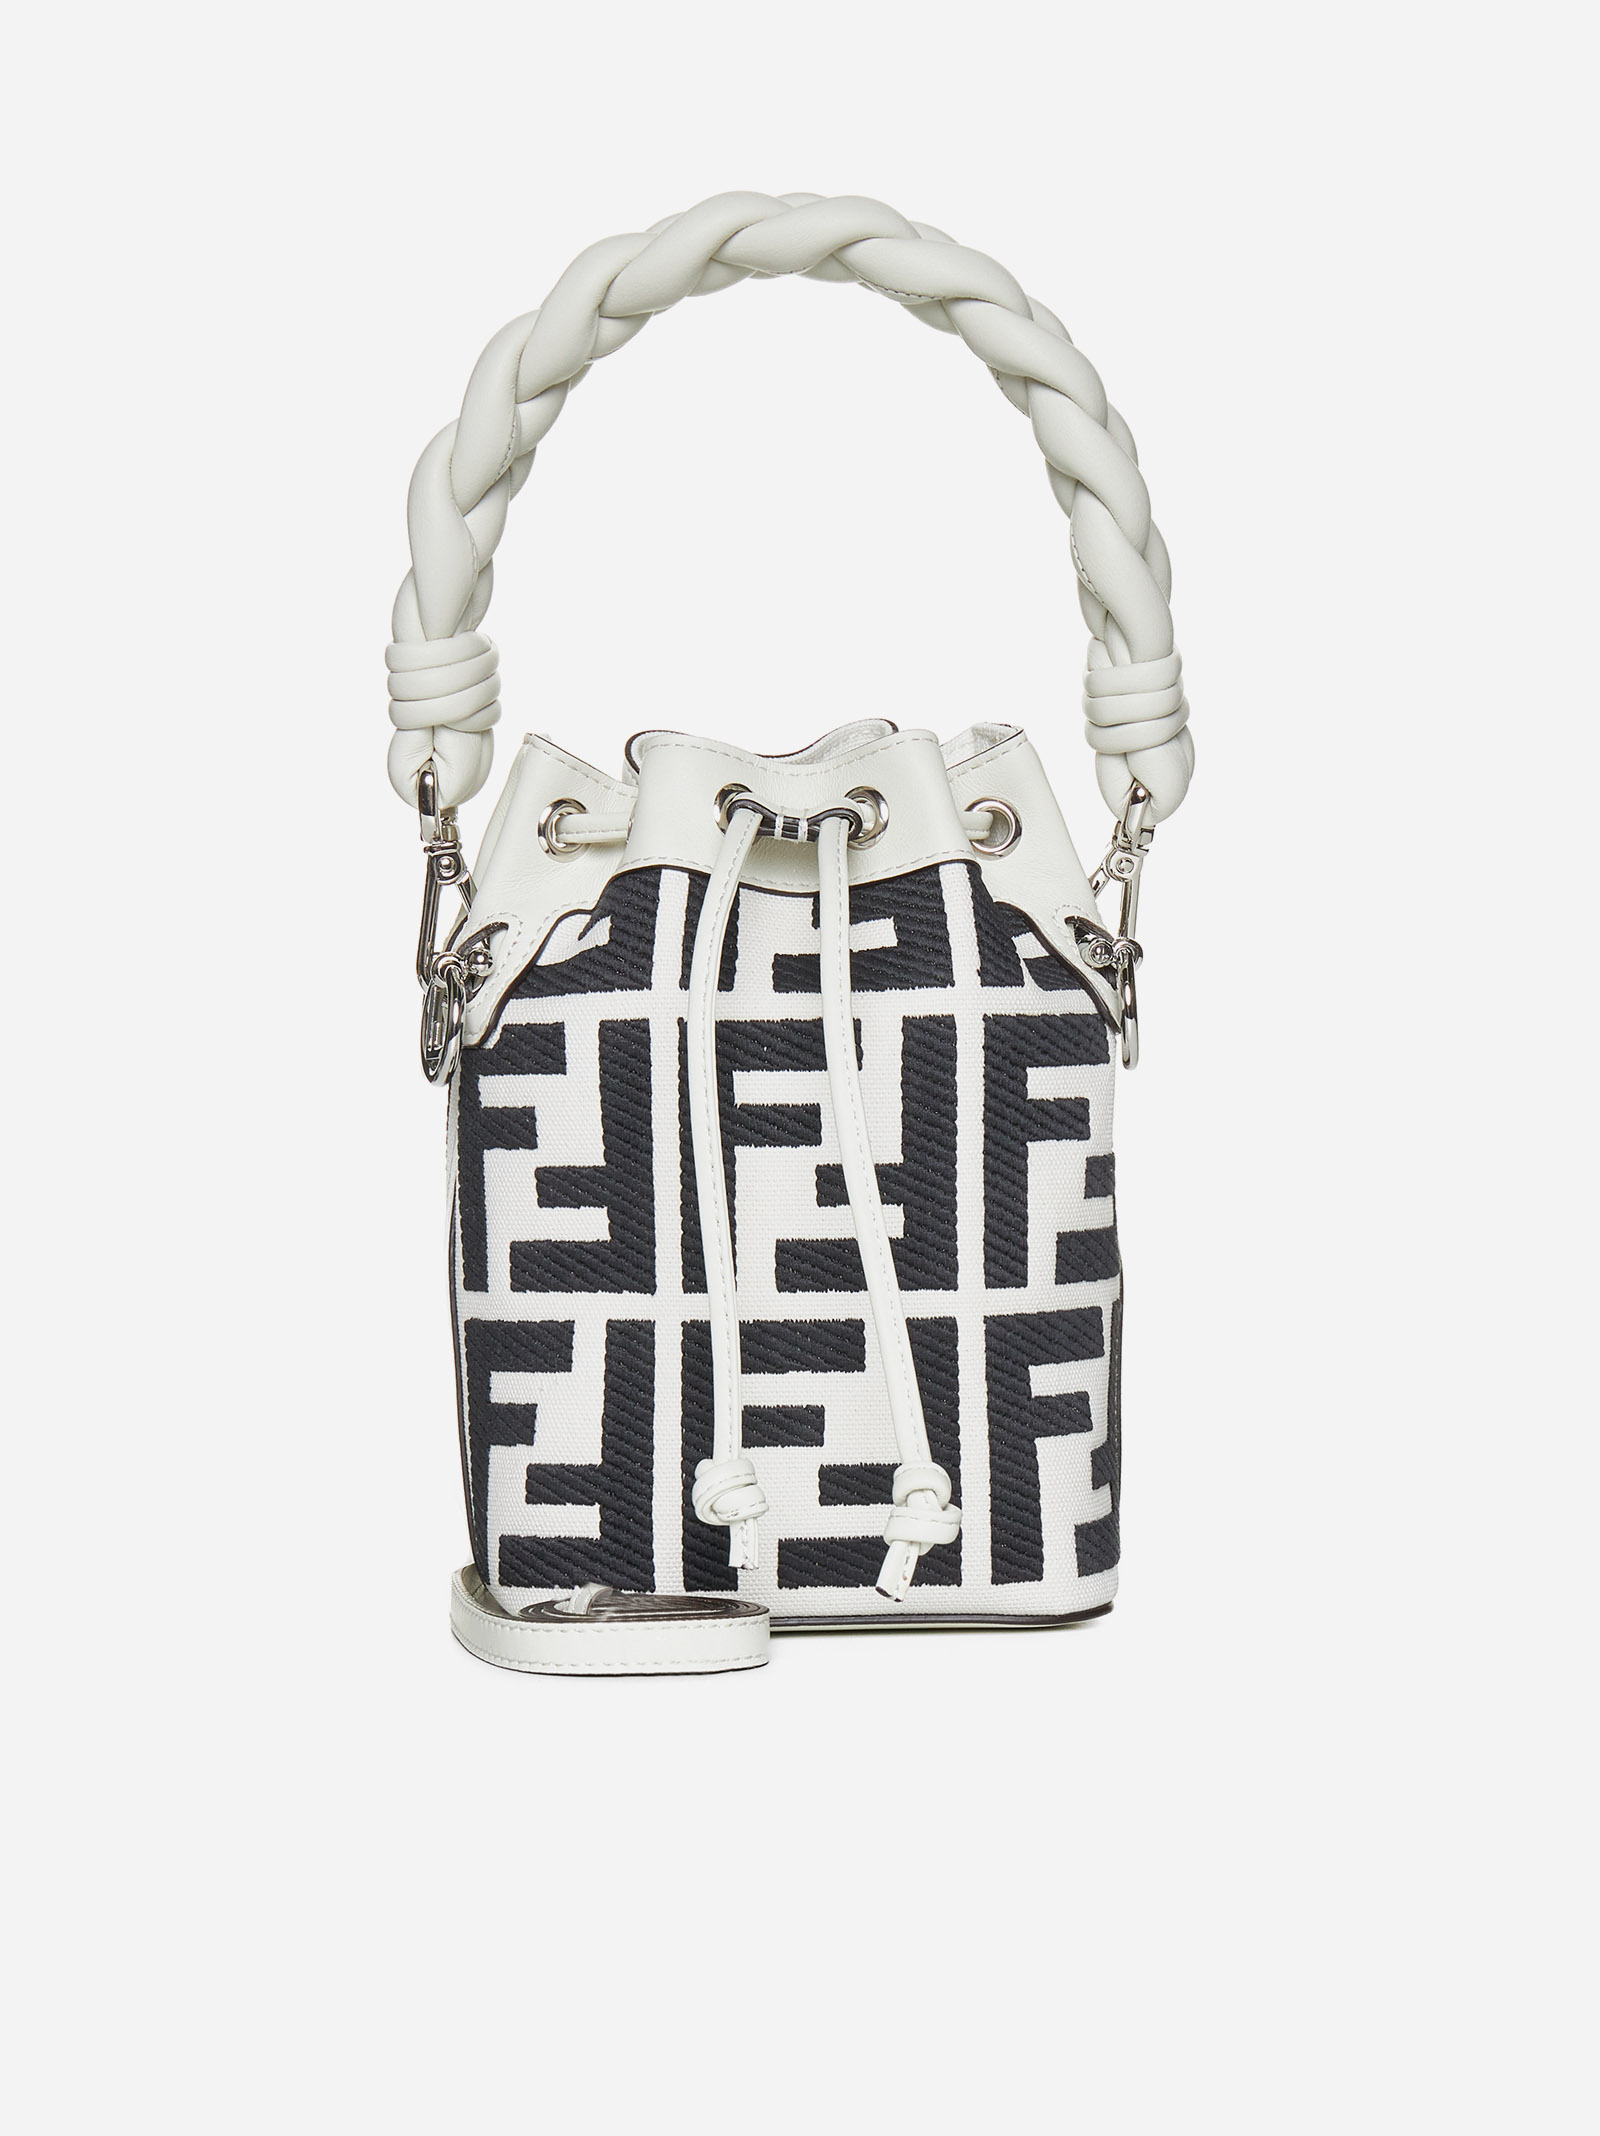 The Fendi Bucket Bag Is Your New BFF If You're a Millenial Or Gen-Z! Find  Out Why?